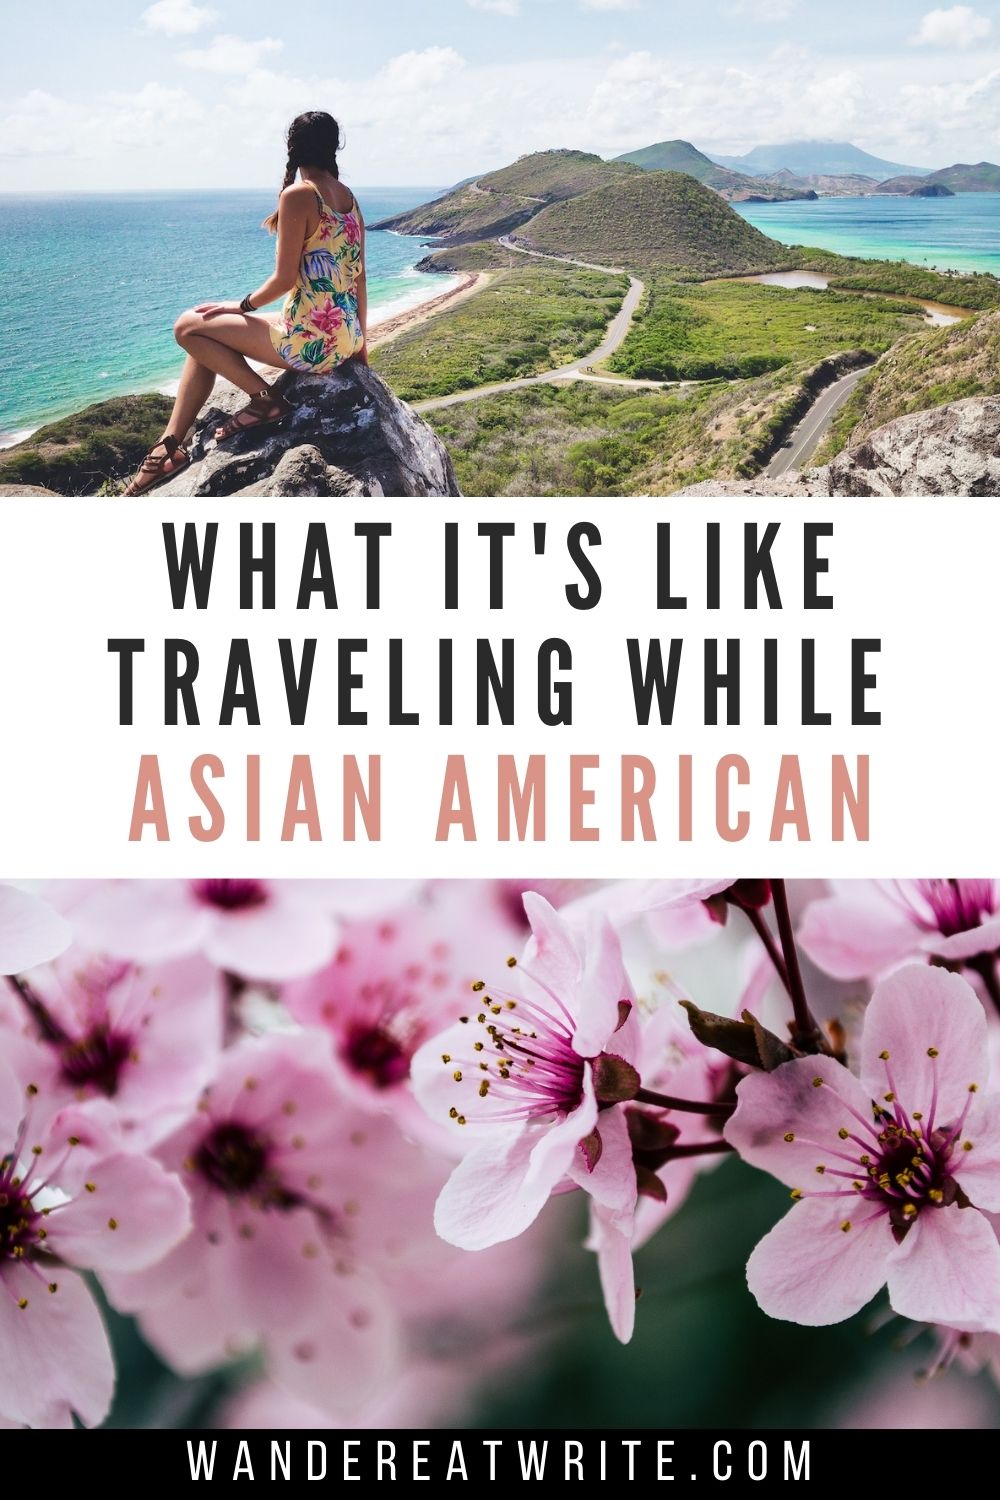 Text: What it's like traveling while Asian American; Top photo: girl in yellow floral romper sitting on rock overlooking view of Caribbean Sea and Atlantic Ocean divided by strip of hilly greens; Bottom photo: pink cherry blossoms 